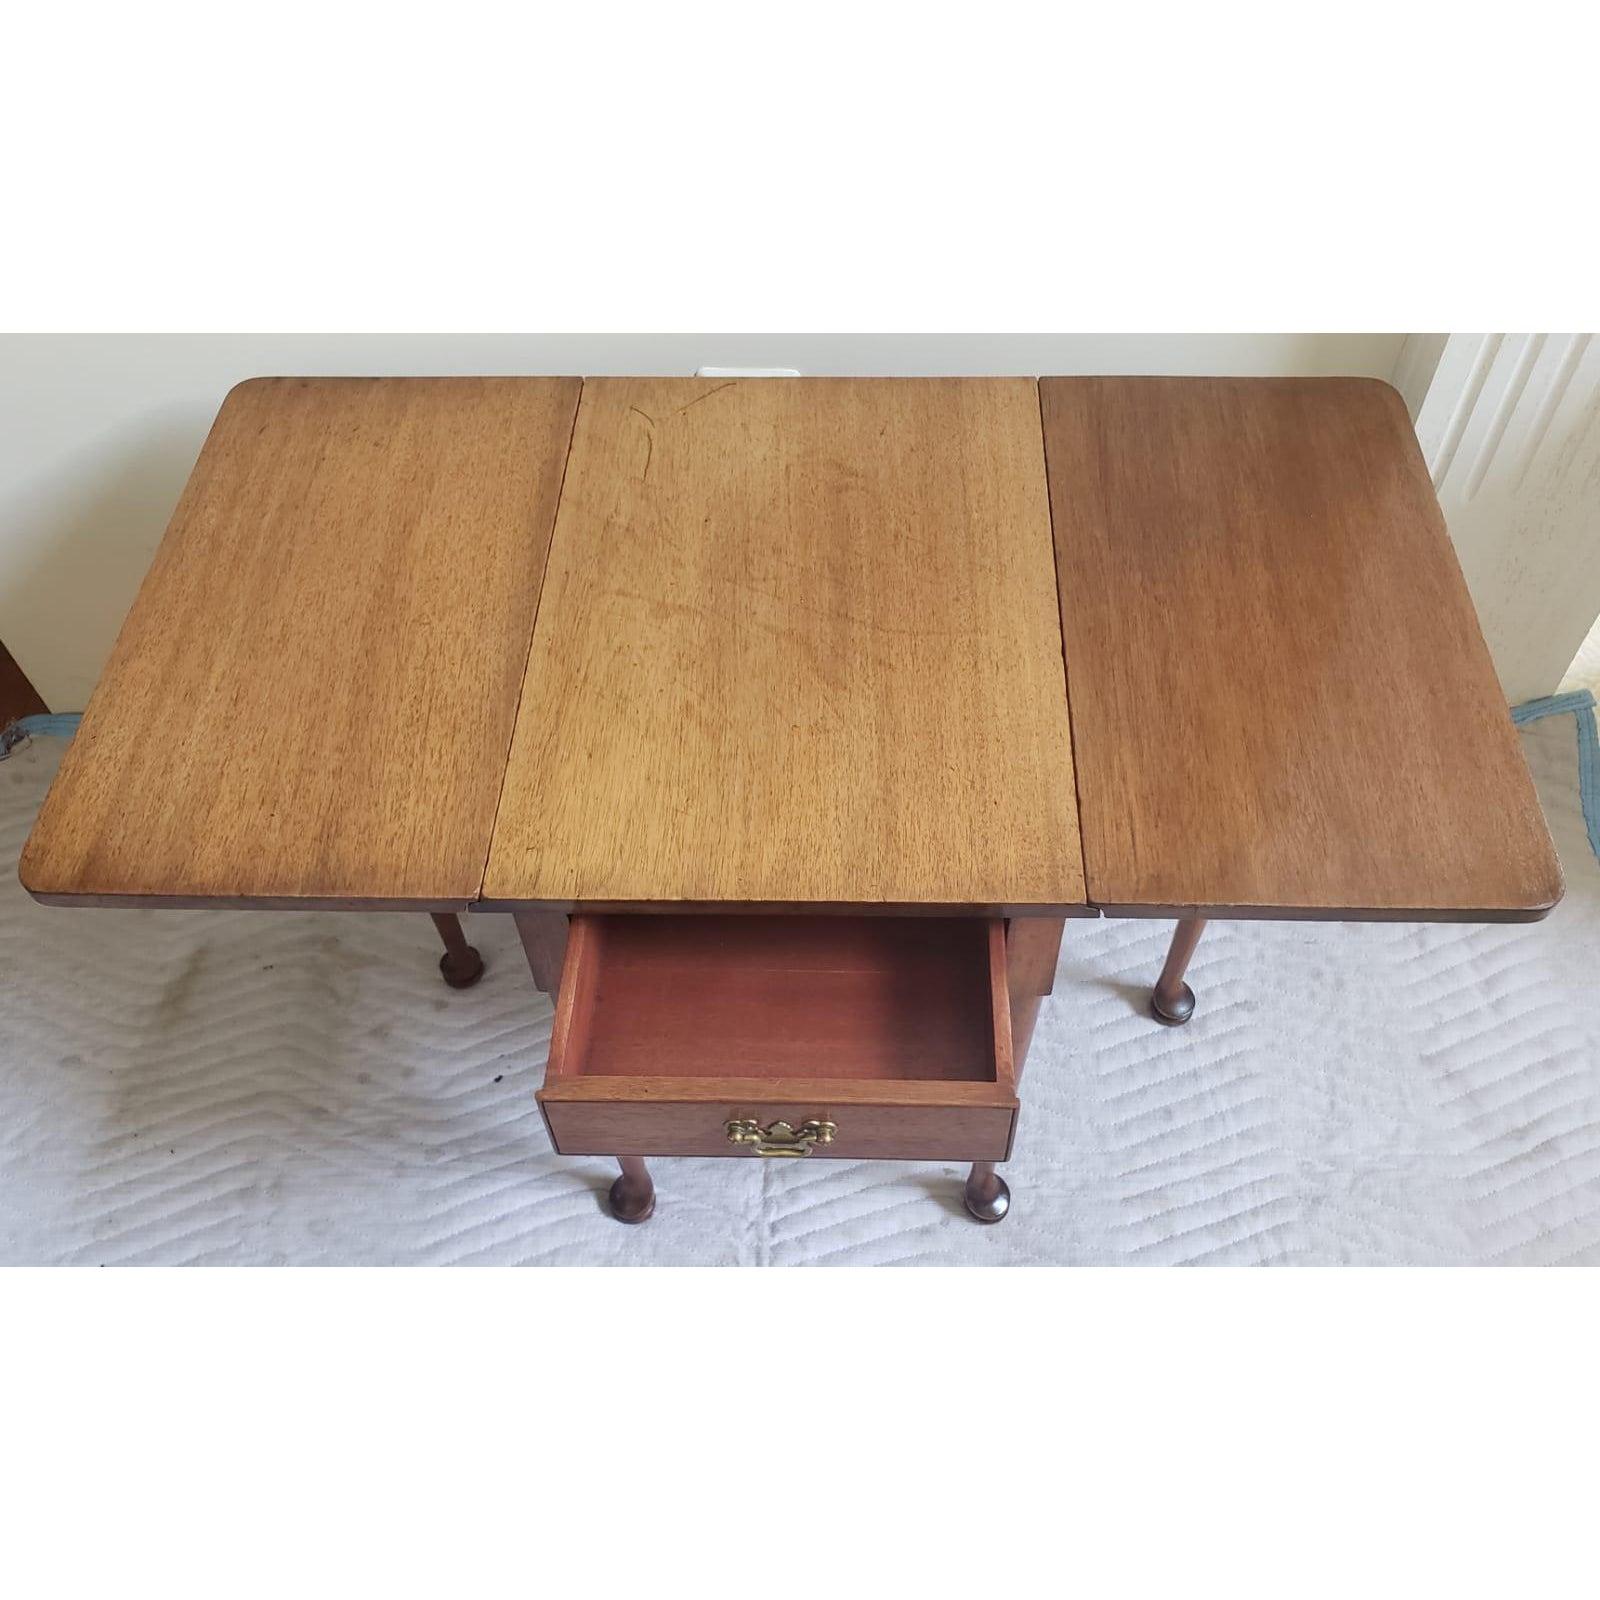 1940s Biggs Kittinger Chippendale Mahogany Drop Leaf Side Table In Good Condition For Sale In Germantown, MD